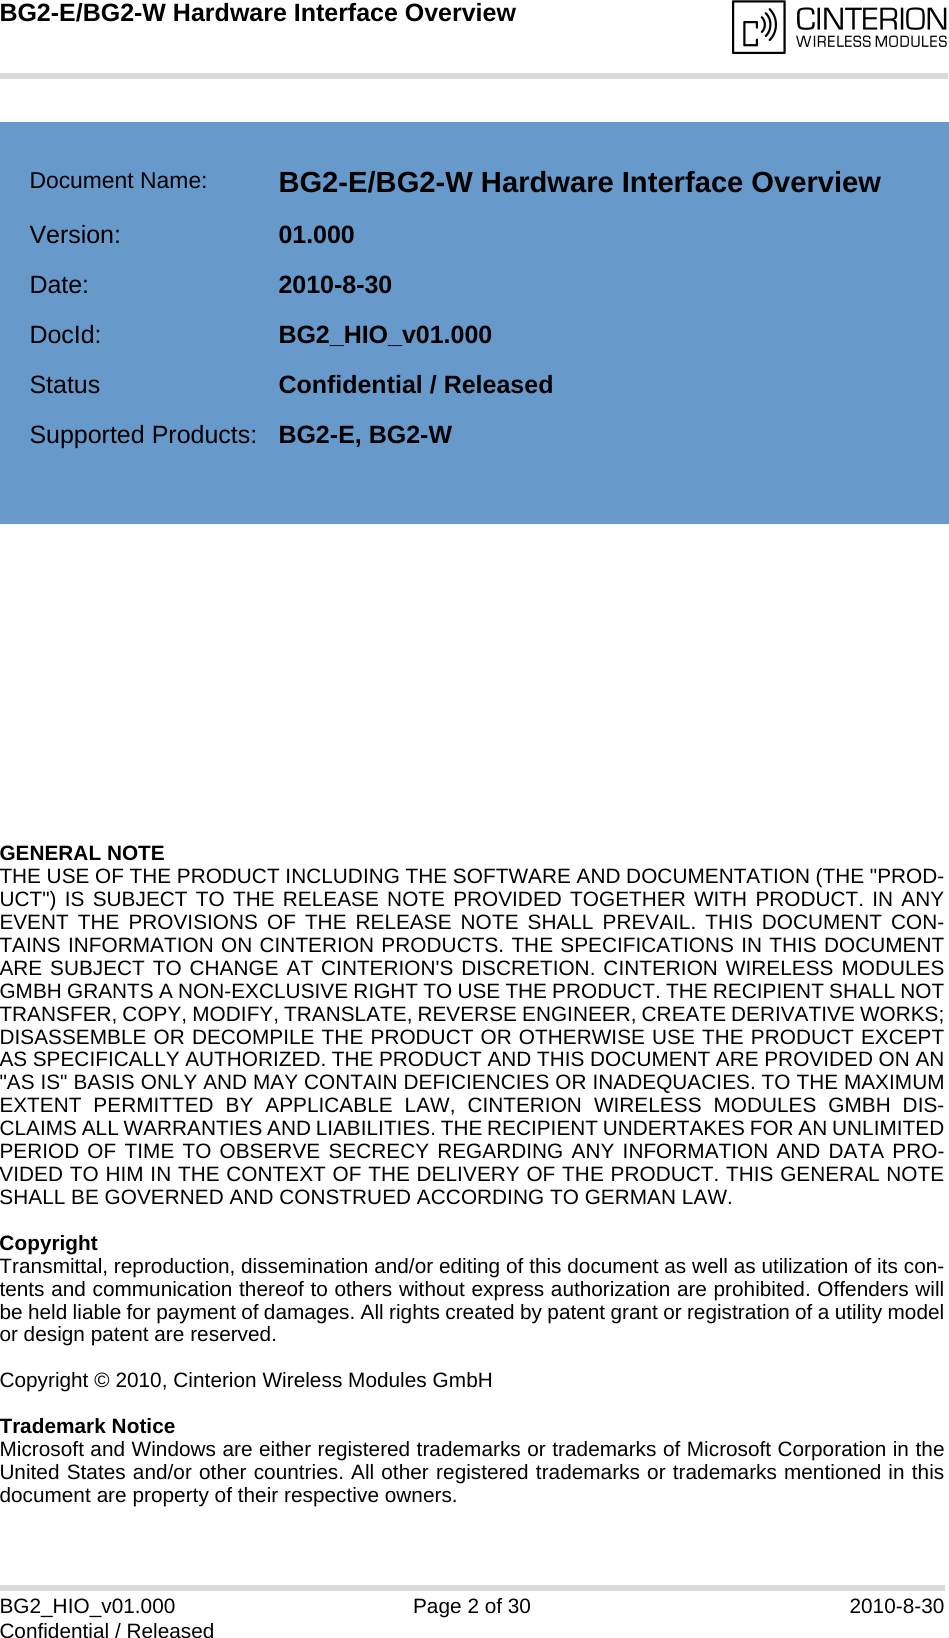 GENERAL NOTE THE USE OF THE PRODUCT INCLUDING THE SOFTWARE AND DOCUMENTATION (THE &quot;PROD-UCT&quot;) IS SUBJECT TO THE RELEASE NOTE PROVIDED TOGETHER WITH PRODUCT. IN ANYEVENT THE PROVISIONS OF THE RELEASE NOTE SHALL PREVAIL. THIS DOCUMENT CON-TAINS INFORMATION ON CINTERION PRODUCTS. THE SPECIFICATIONS IN THIS DOCUMENTARE SUBJECT TO CHANGE AT CINTERION&apos;S DISCRETION. CINTERION WIRELESS MODULESGMBH GRANTS A NON-EXCLUSIVE RIGHT TO USE THE PRODUCT. THE RECIPIENT SHALL NOTTRANSFER, COPY, MODIFY, TRANSLATE, REVERSE ENGINEER, CREATE DERIVATIVE WORKS;DISASSEMBLE OR DECOMPILE THE PRODUCT OR OTHERWISE USE THE PRODUCT EXCEPTAS SPECIFICALLY AUTHORIZED. THE PRODUCT AND THIS DOCUMENT ARE PROVIDED ON AN&quot;AS IS&quot; BASIS ONLY AND MAY CONTAIN DEFICIENCIES OR INADEQUACIES. TO THE MAXIMUMEXTENT PERMITTED BY APPLICABLE LAW, CINTERION WIRELESS MODULES GMBH DIS-CLAIMS ALL WARRANTIES AND LIABILITIES. THE RECIPIENT UNDERTAKES FOR AN UNLIMITEDPERIOD OF TIME TO OBSERVE SECRECY REGARDING ANY INFORMATION AND DATA PRO-VIDED TO HIM IN THE CONTEXT OF THE DELIVERY OF THE PRODUCT. THIS GENERAL NOTESHALL BE GOVERNED AND CONSTRUED ACCORDING TO GERMAN LAW.CopyrightTransmittal, reproduction, dissemination and/or editing of this document as well as utilization of its con-tents and communication thereof to others without express authorization are prohibited. Offenders willbe held liable for payment of damages. All rights created by patent grant or registration of a utility modelor design patent are reserved. Copyright © 2010, Cinterion Wireless Modules GmbH Trademark NoticeMicrosoft and Windows are either registered trademarks or trademarks of Microsoft Corporation in theUnited States and/or other countries. All other registered trademarks or trademarks mentioned in thisdocument are property of their respective owners.BG2_HIO_v01.000 Page 2 of 30 2010-8-30Confidential / ReleasedBG2-E/BG2-W Hardware Interface Overview2Document Name: BG2-E/BG2-W Hardware Interface OverviewVersion: 01.000Date: 2010-8-30DocId: BG2_HIO_v01.000Status Confidential / ReleasedSupported Products: BG2-E, BG2-W